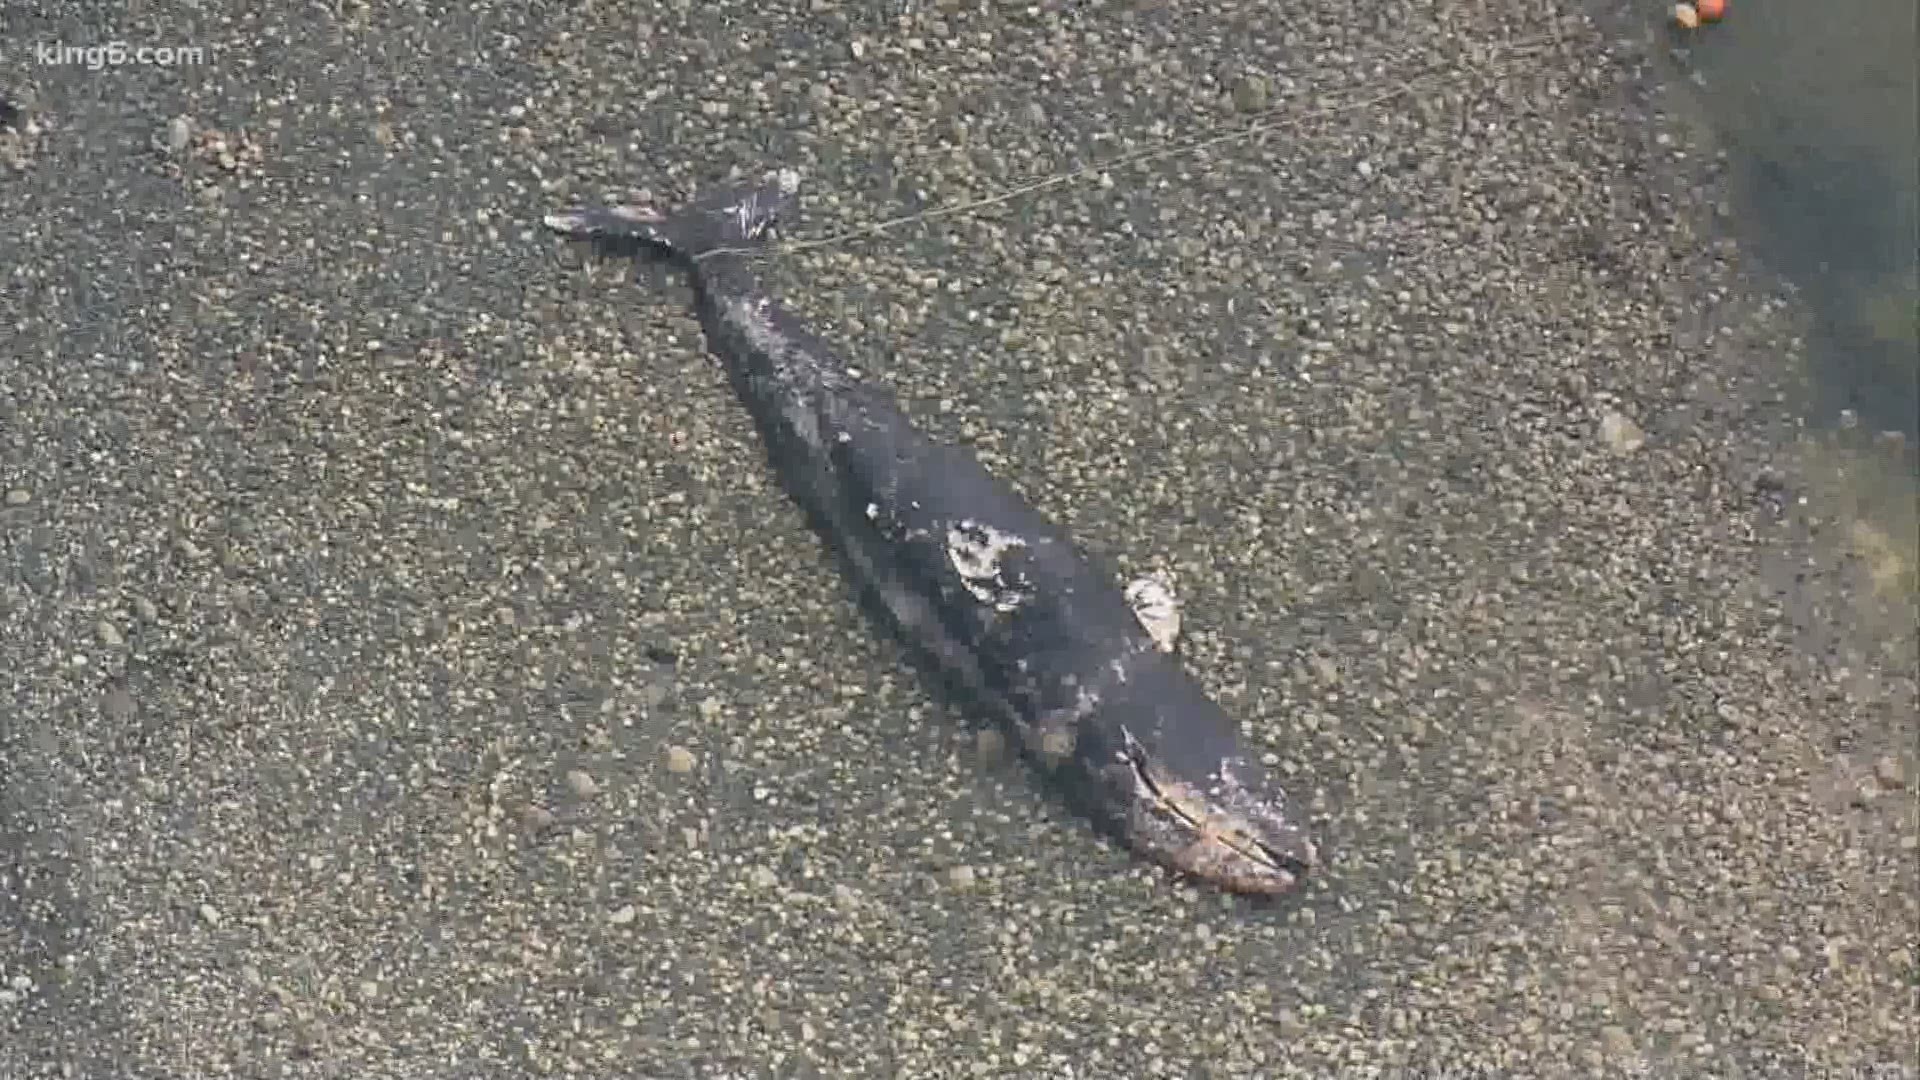 It's the 6th gray whale to be found dead in Washington this year.